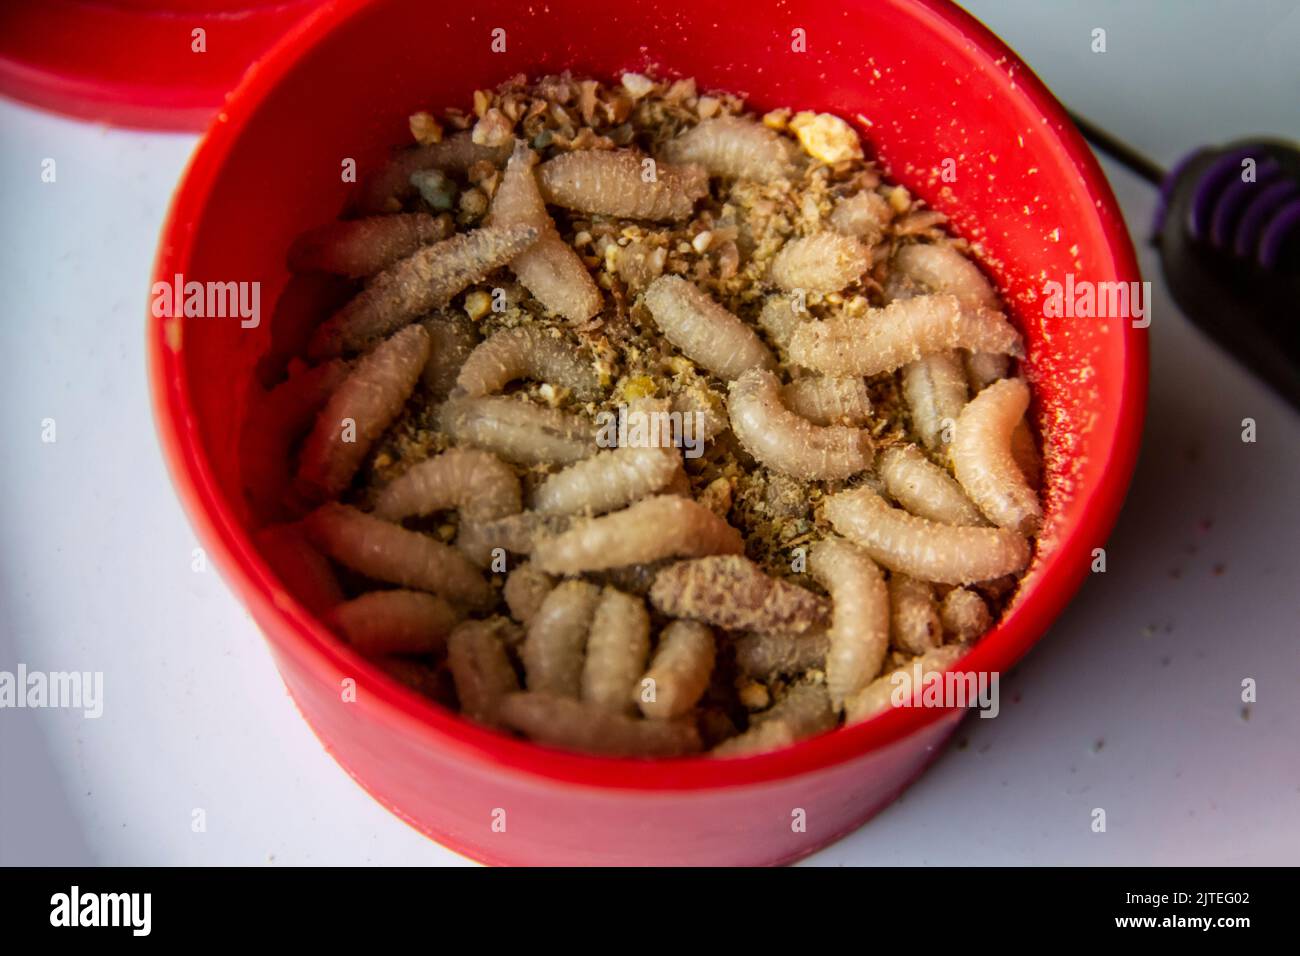 Live fly larvae in the red plastic plate as bait for catching fish. The maggots for fishing against background Stock Photo